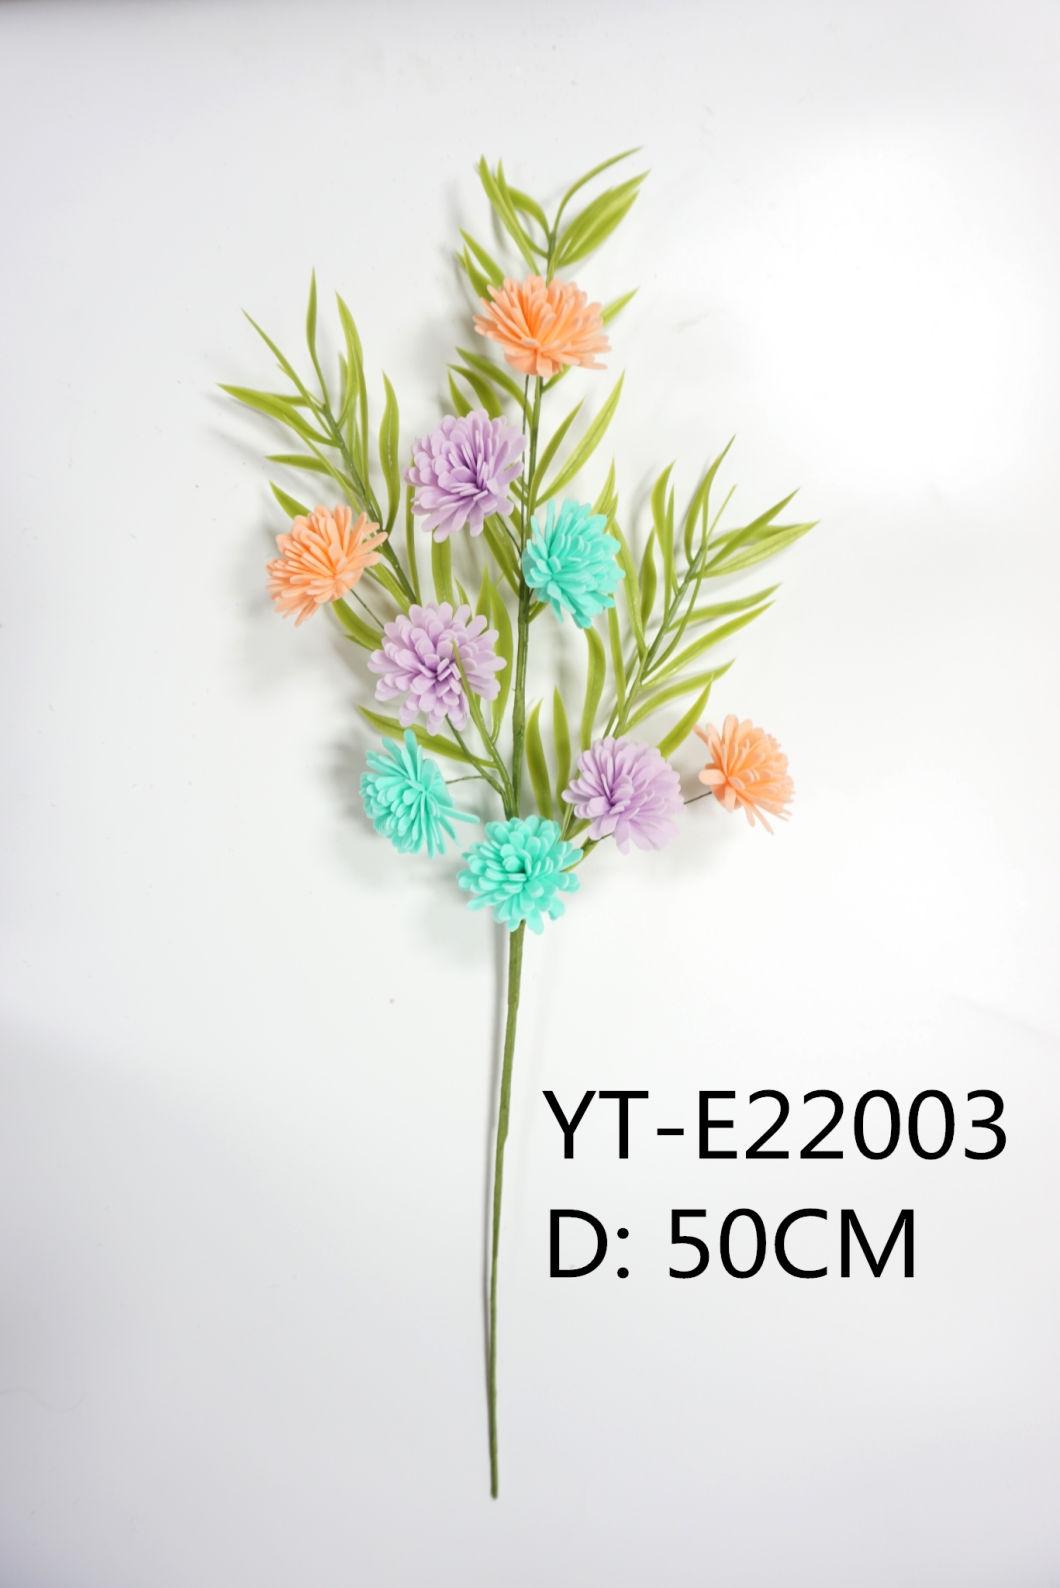 BSCI High Quality Hot Sale Easter Decorations Picks with Easter Eggs